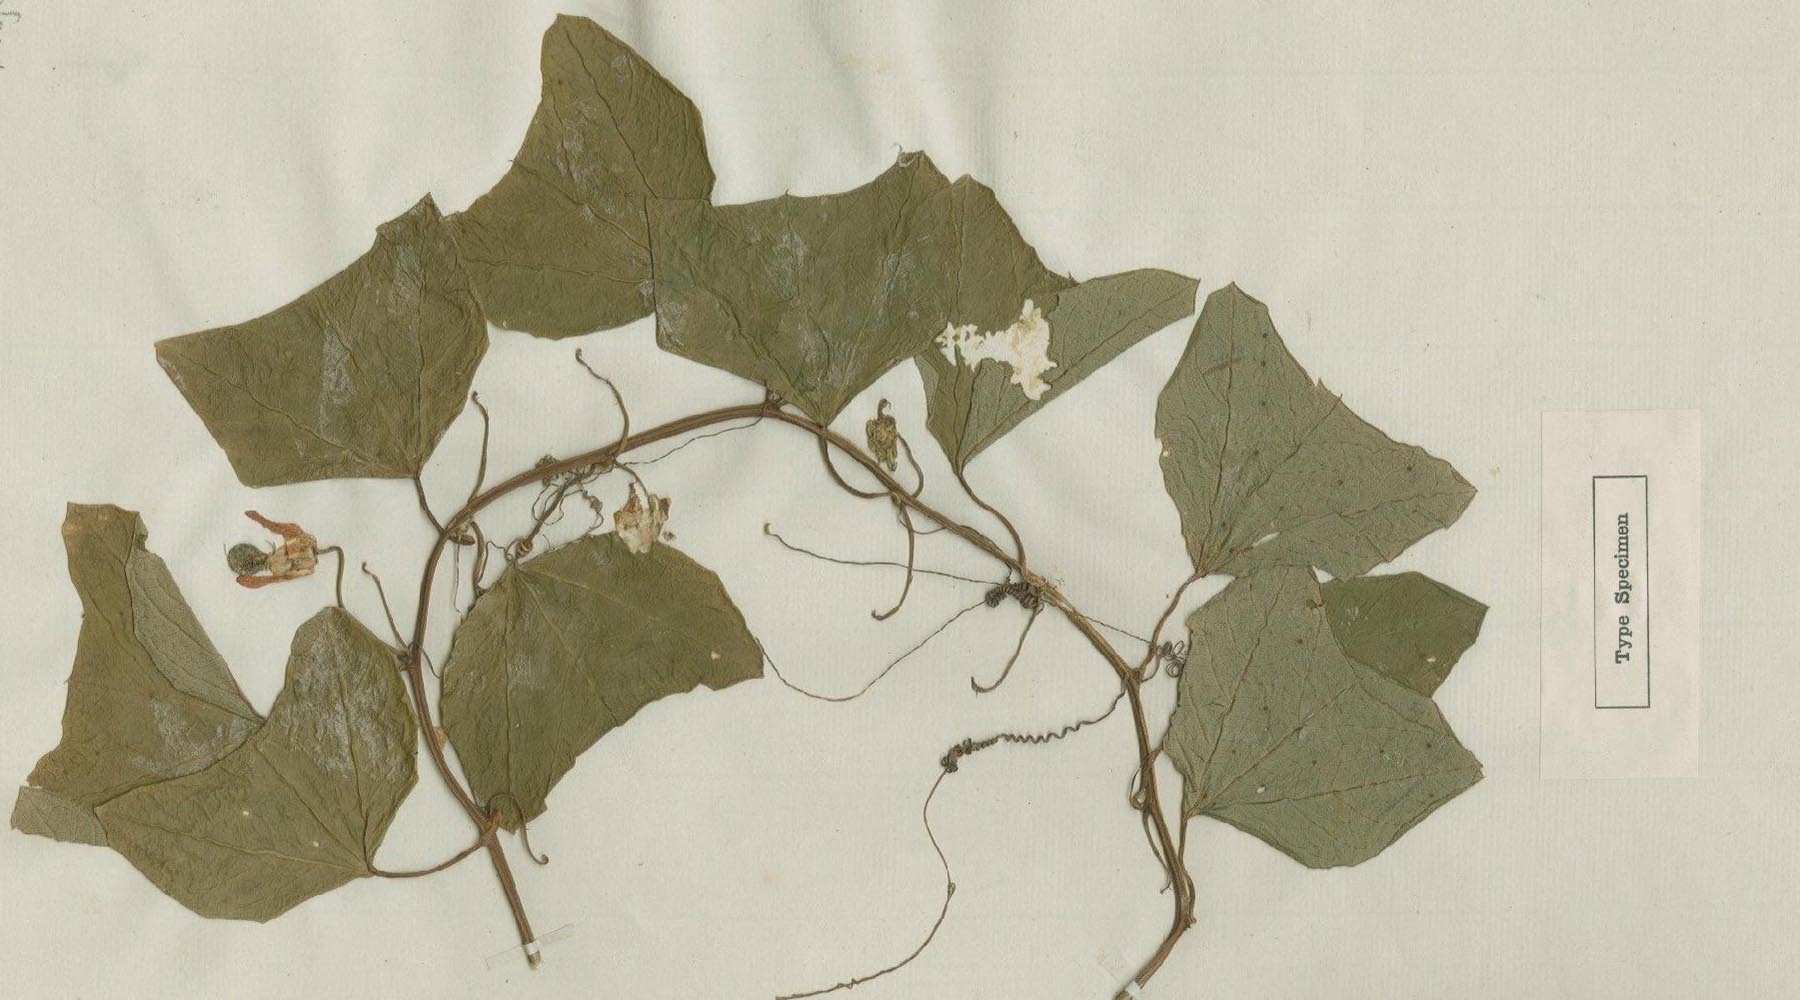 A dried and pressed specimen of the tropical flower Passiflora andersonii